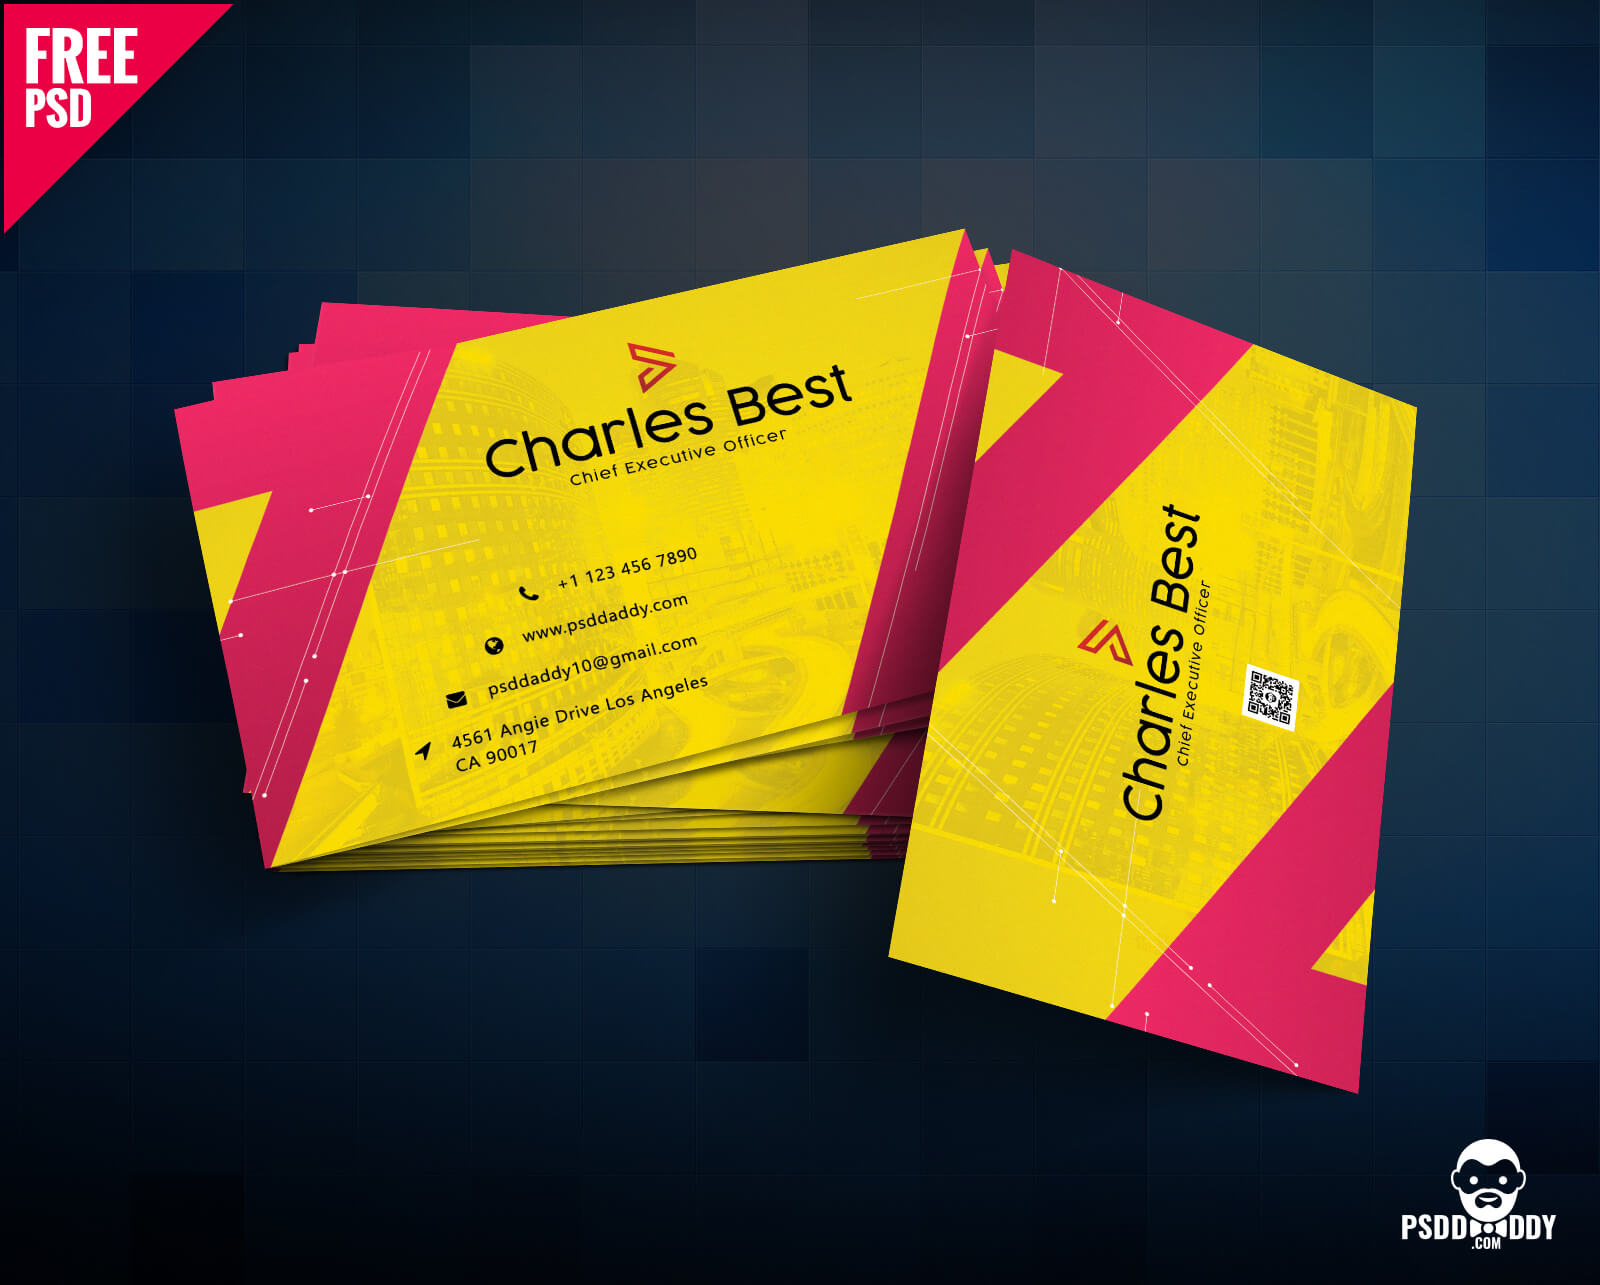 Download] Creative Business Card Free Psd | Psddaddy Pertaining To Free Psd Visiting Card Templates Download